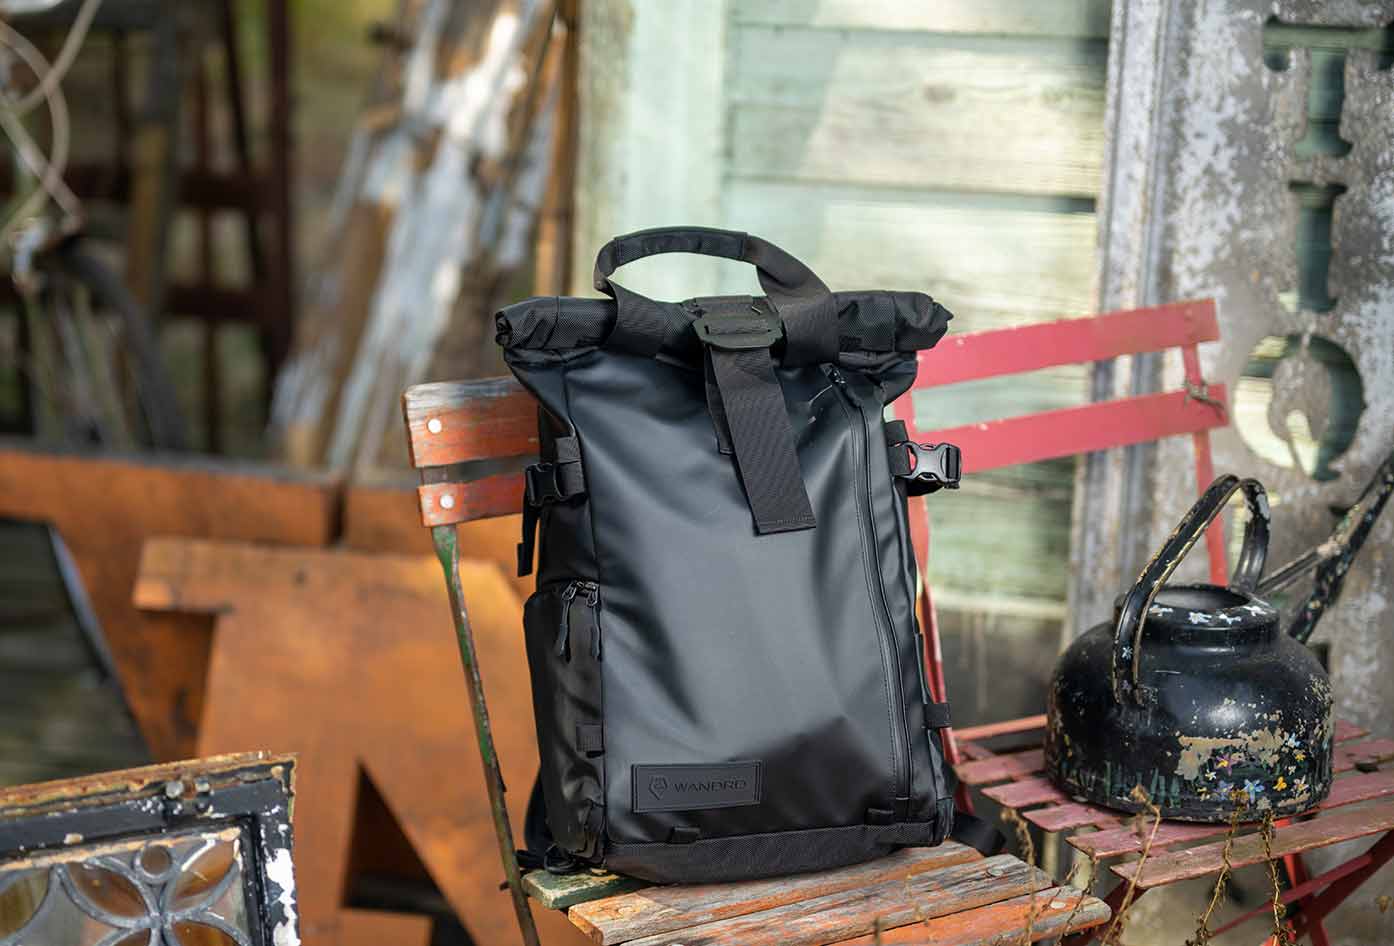 sustainable backpack